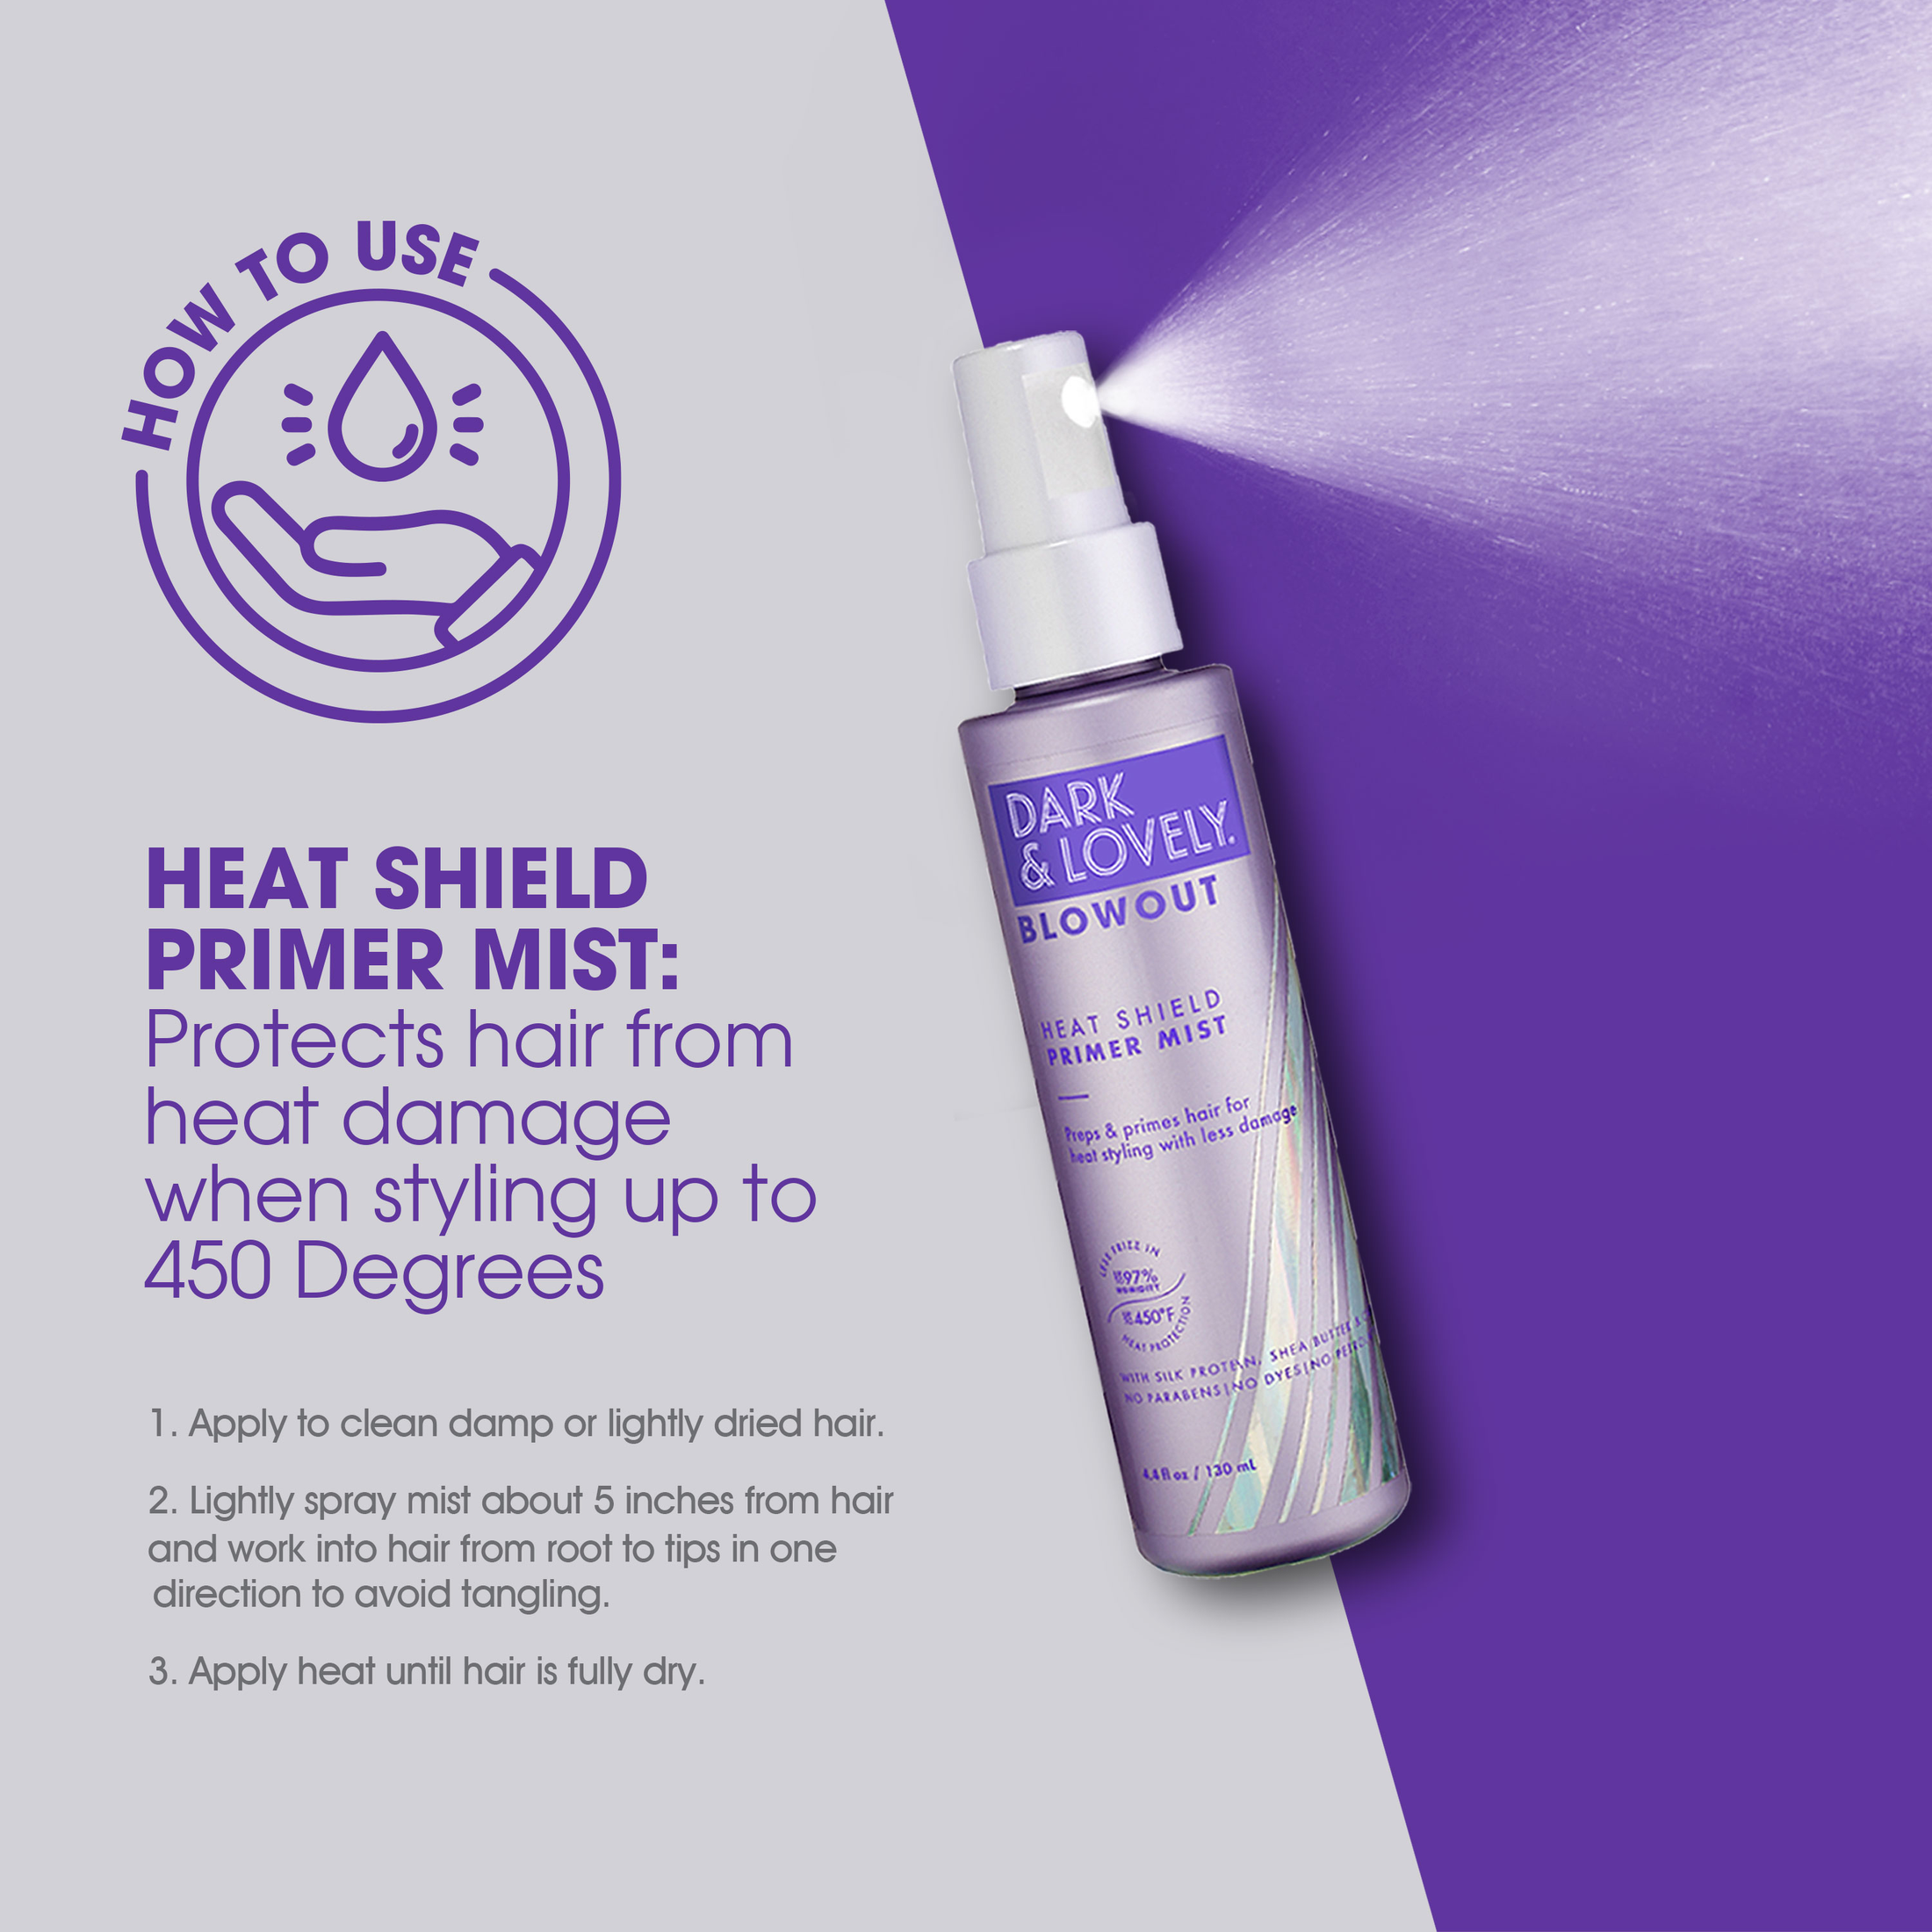 SoftSheen Carson Dark and Lovely Blowout Heat Shield Primer Hair Spray with Silk Protein, 4.4 fl oz - image 5 of 13